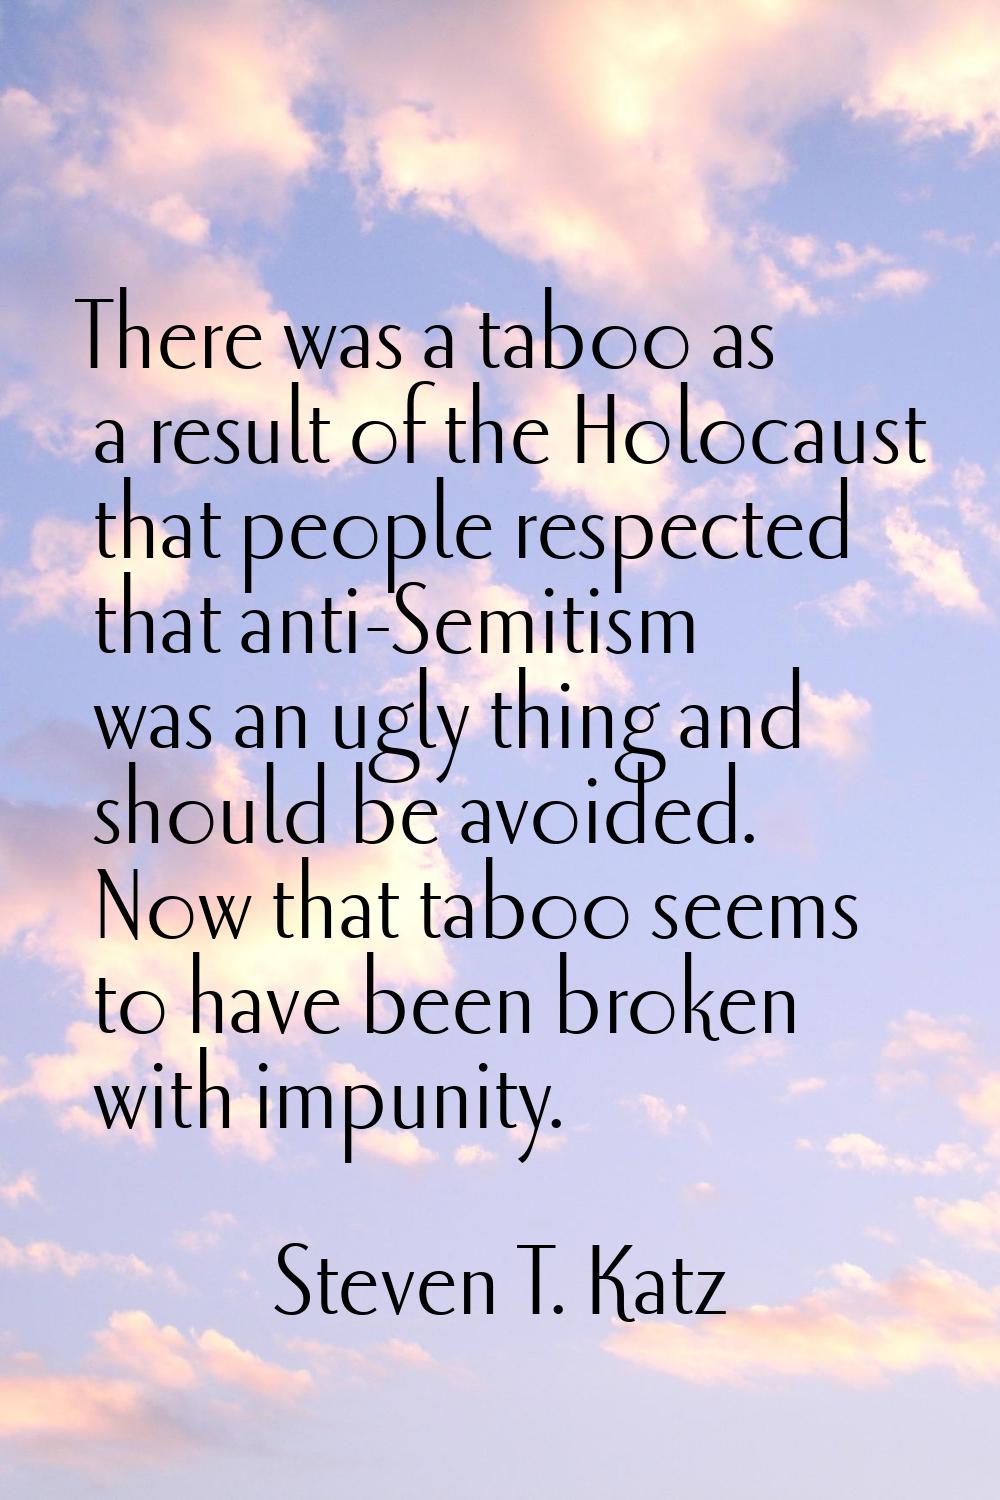 There was a taboo as a result of the Holocaust that people respected that anti-Semitism was an ugly